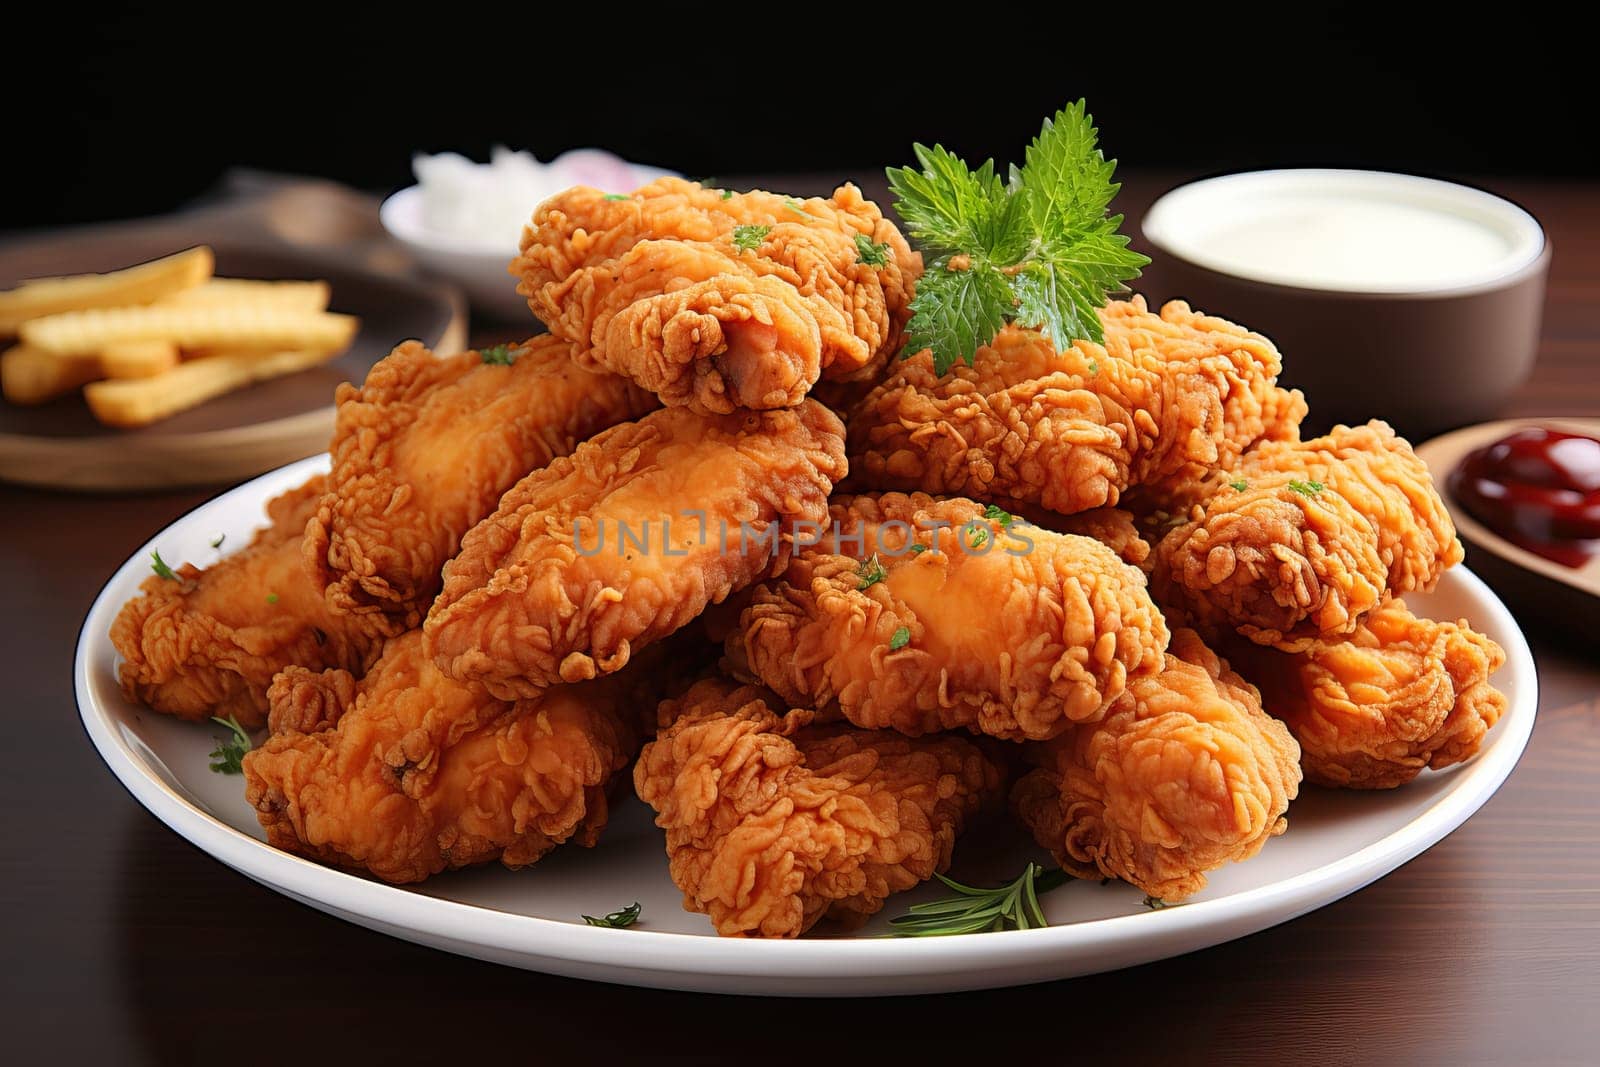 Fried chicken wings in breadcrumbs with sauces on a white plate.